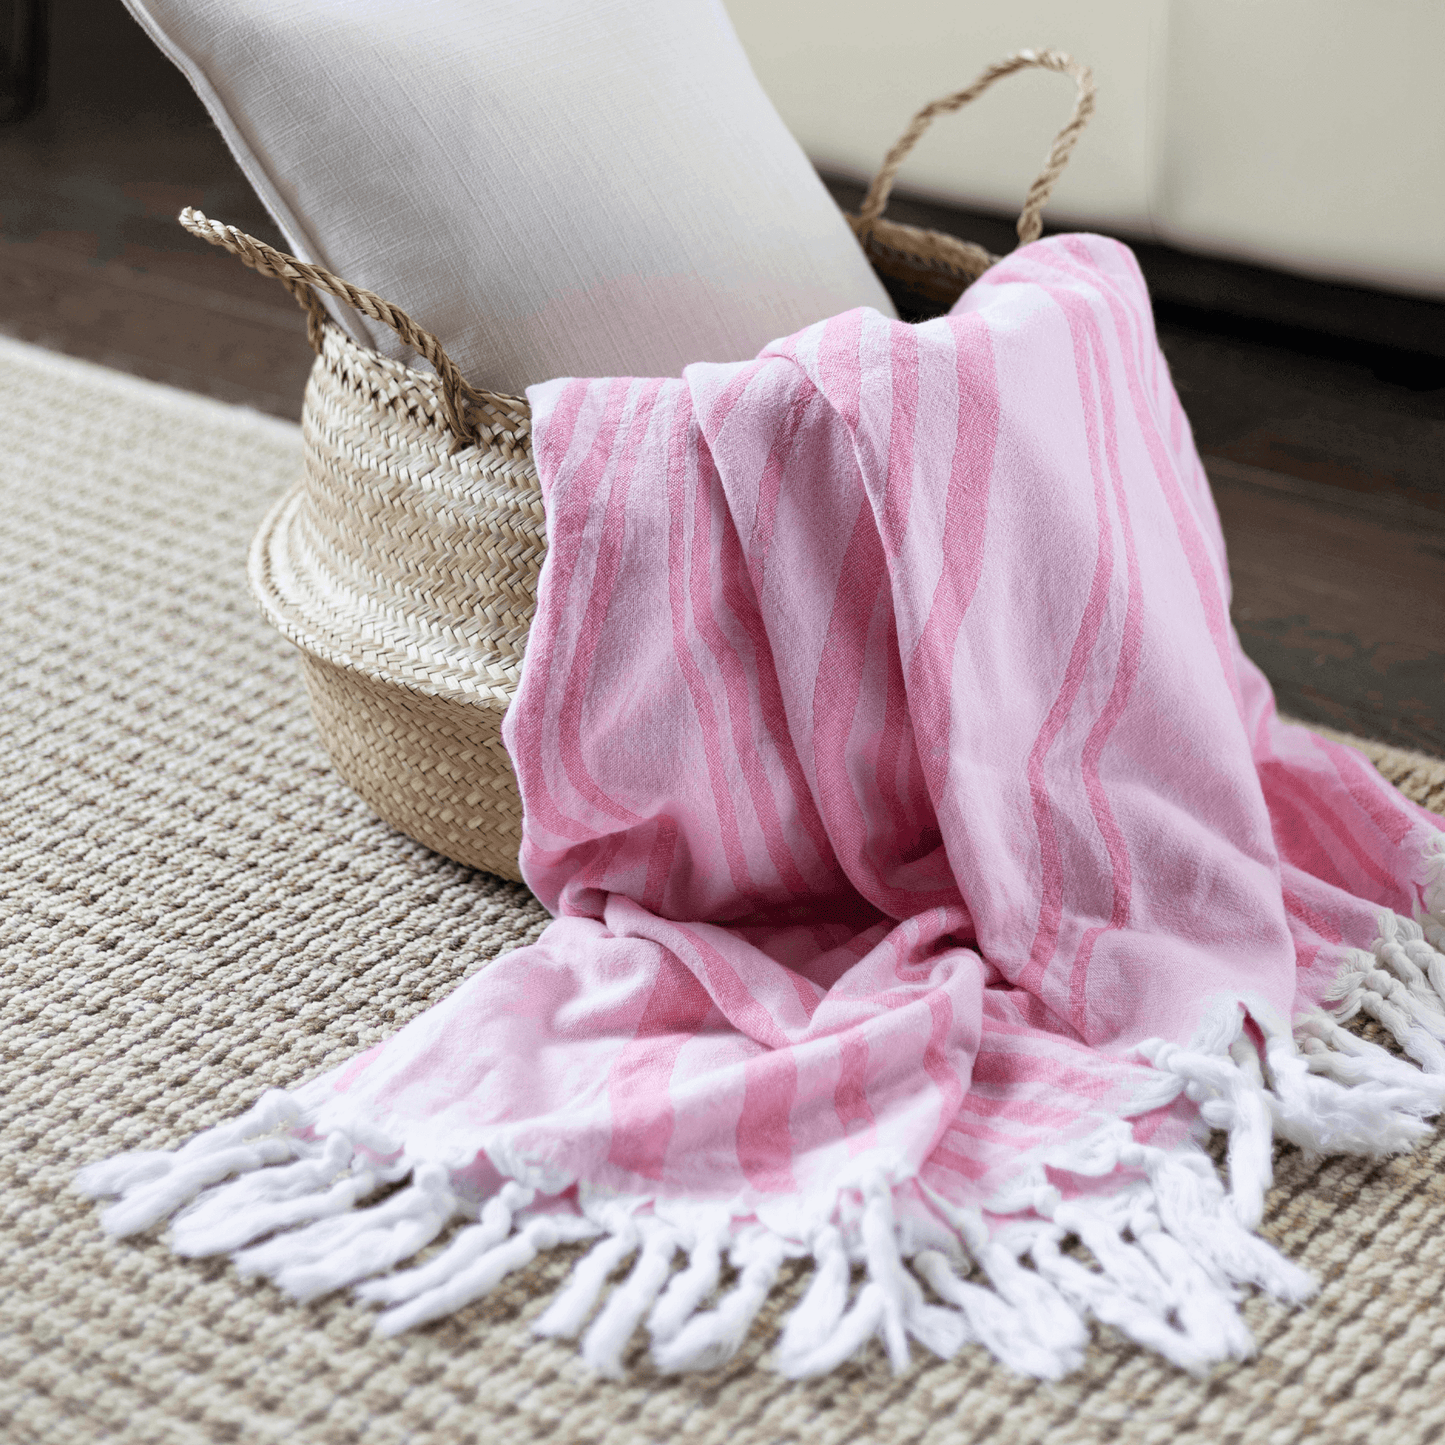 Pink stripped Turkish towel in the living room as decor